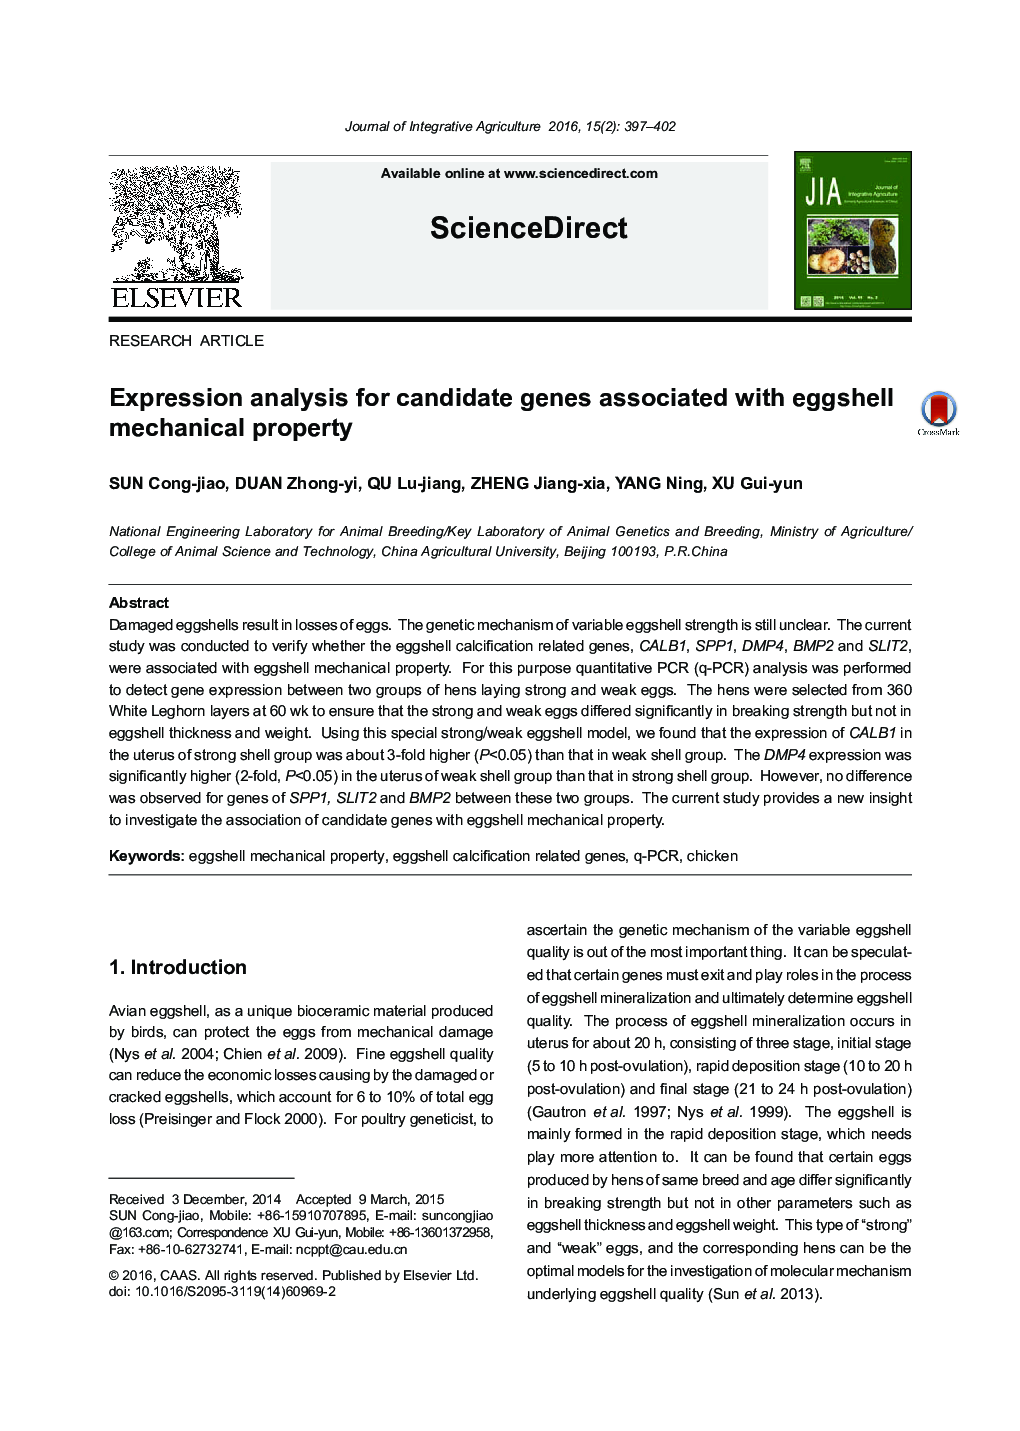 Expression analysis for candidate genes associated with eggshell mechanical property